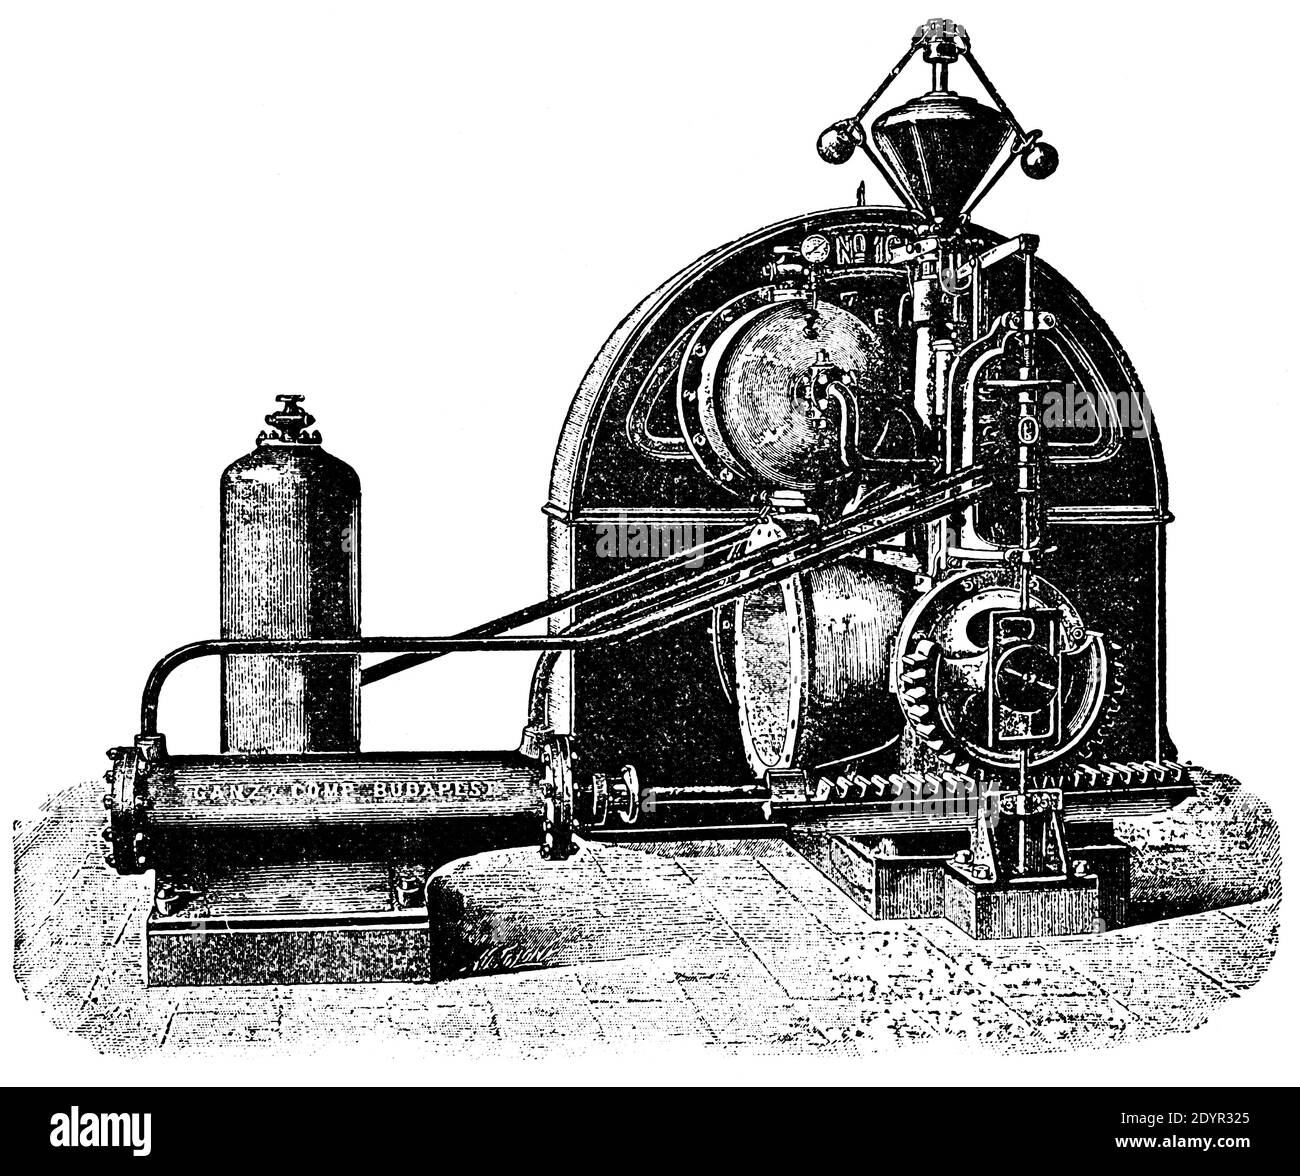 Cutaway water turbine by a French hydraulic engineer Louis Dominique Girard. Illustration of the 19th century. Germany. White background. Stock Photo